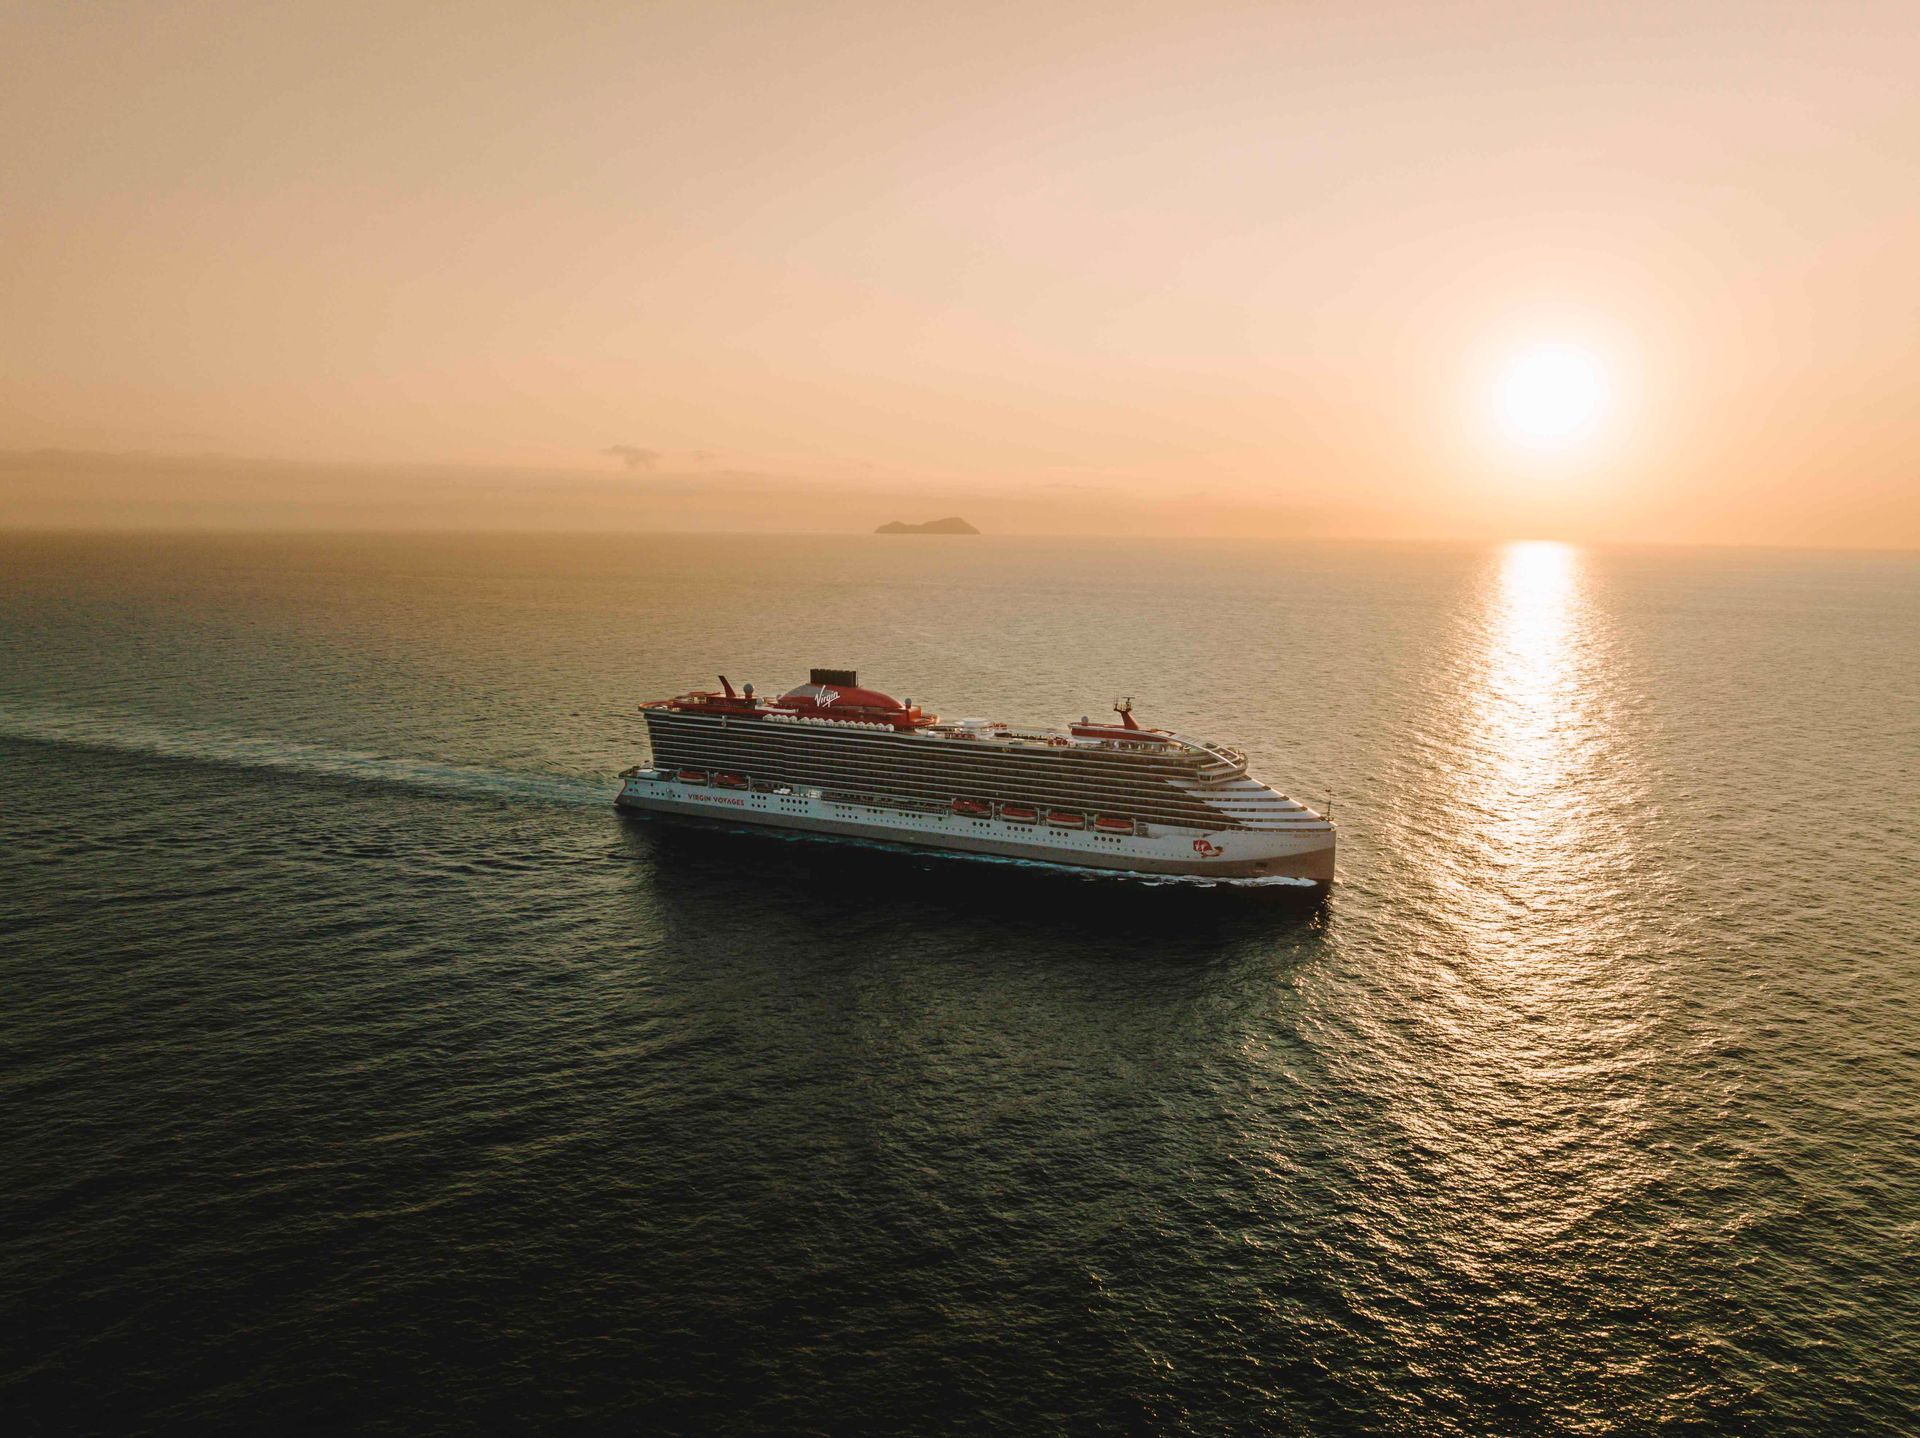 An aerial view of a virgin voyages cruise ship in the ocean at sunset.